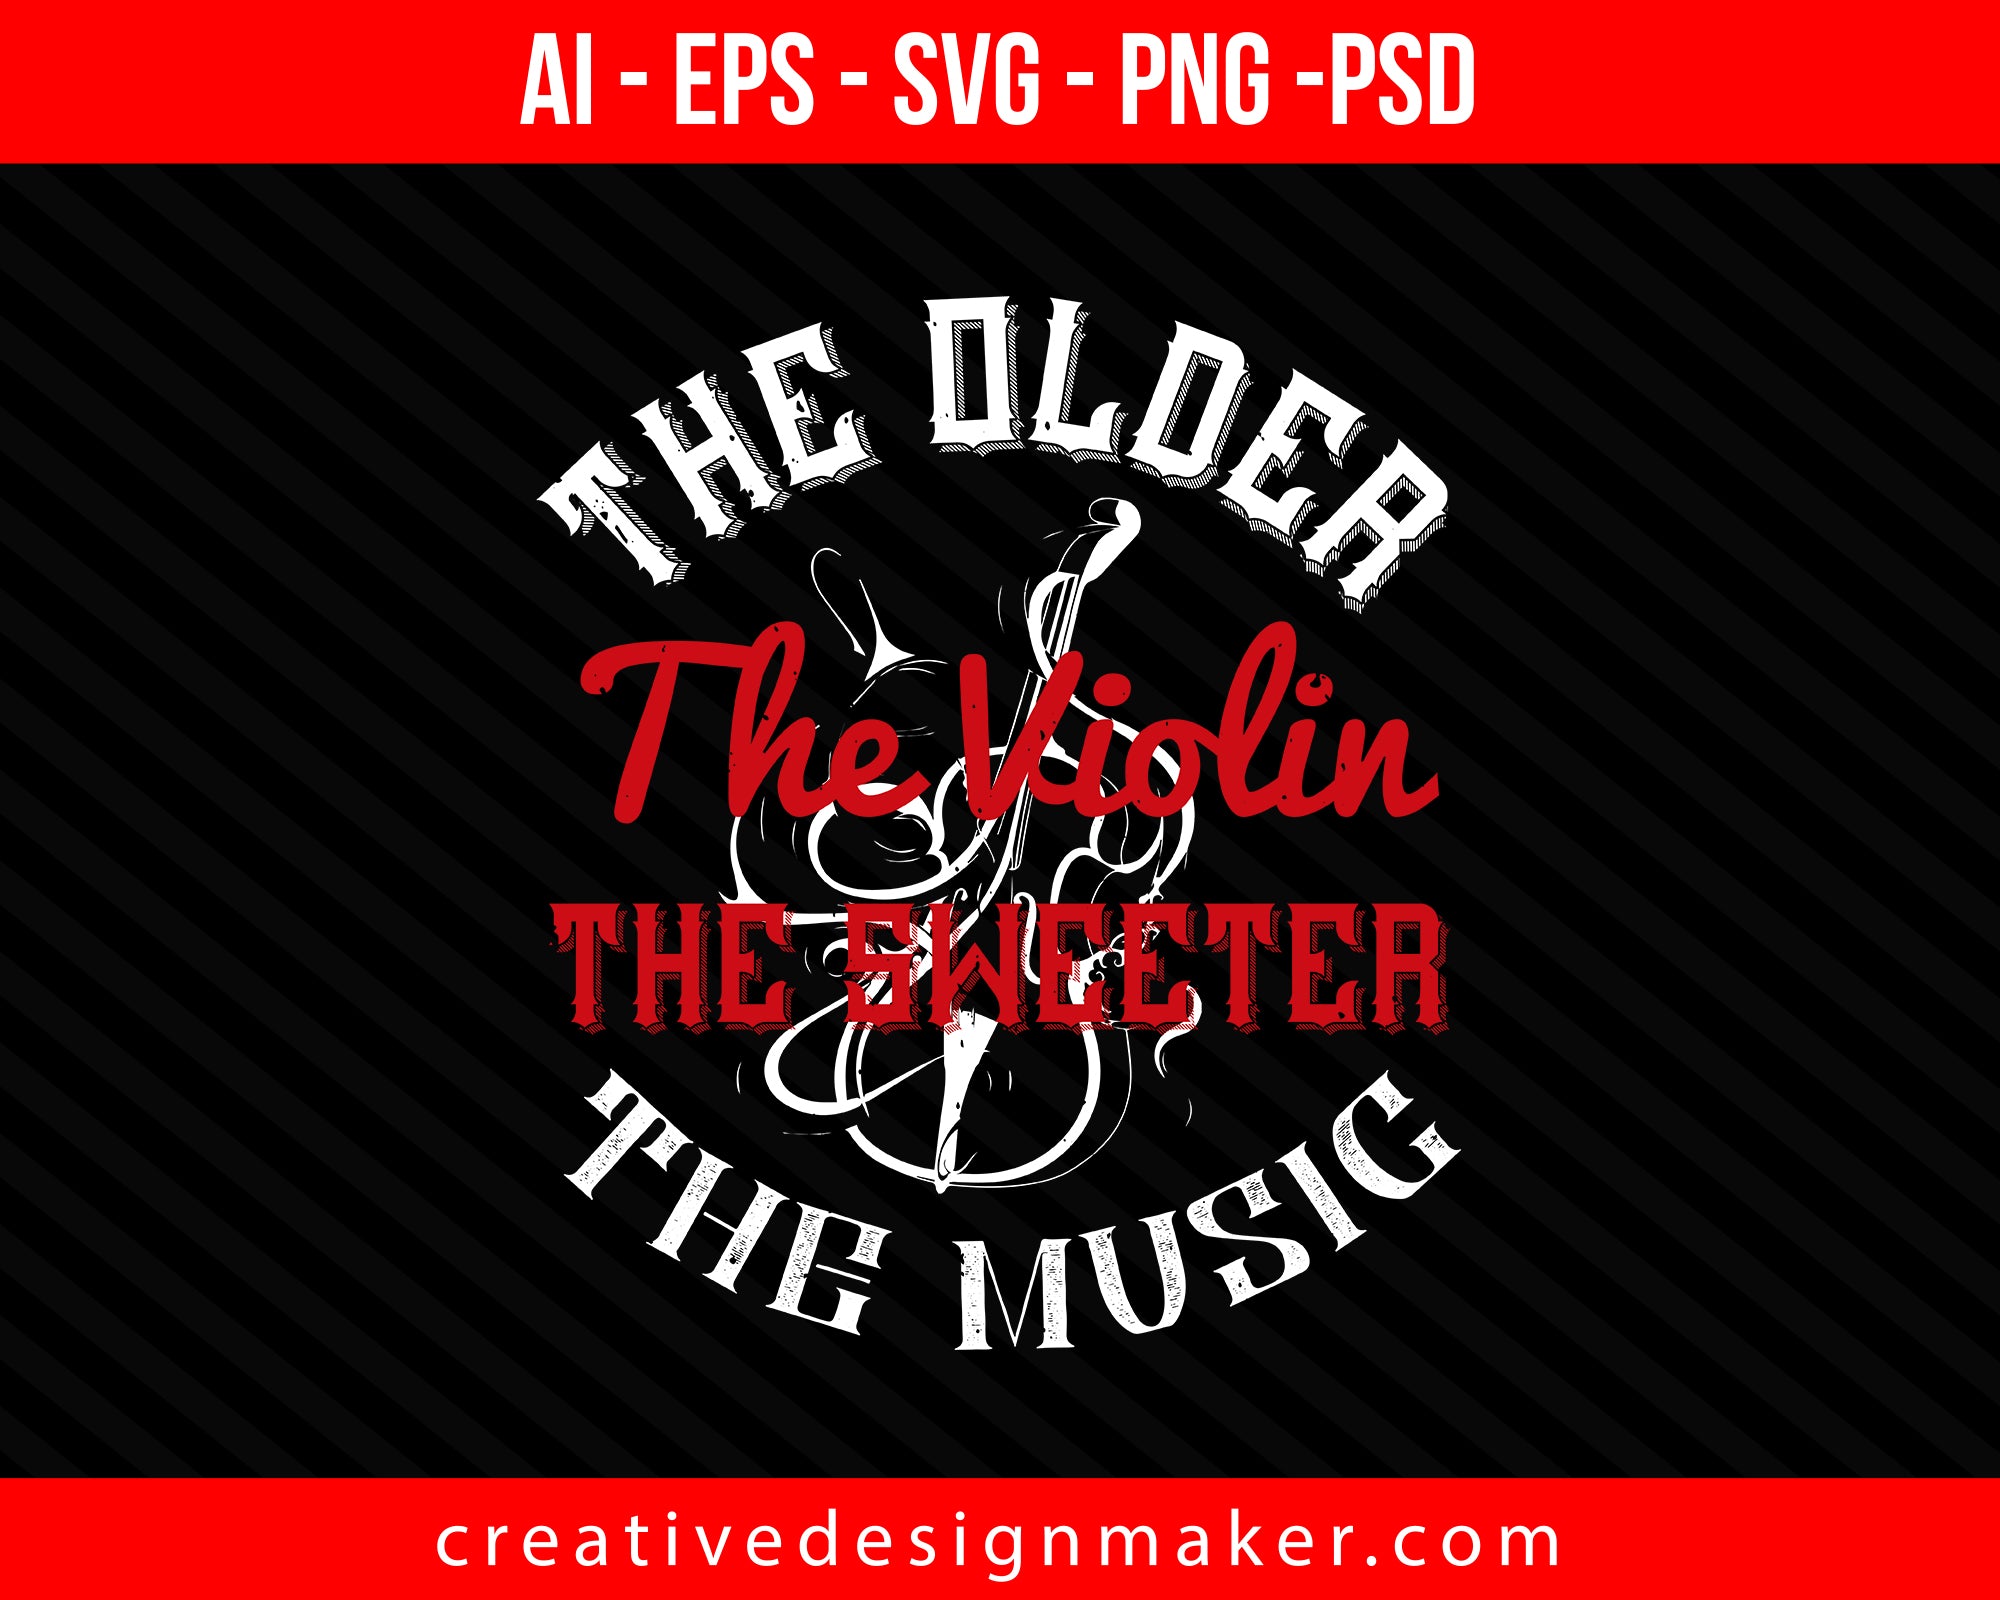 The older the violin, the sweeter the music Print Ready Editable T-Shirt SVG Design!